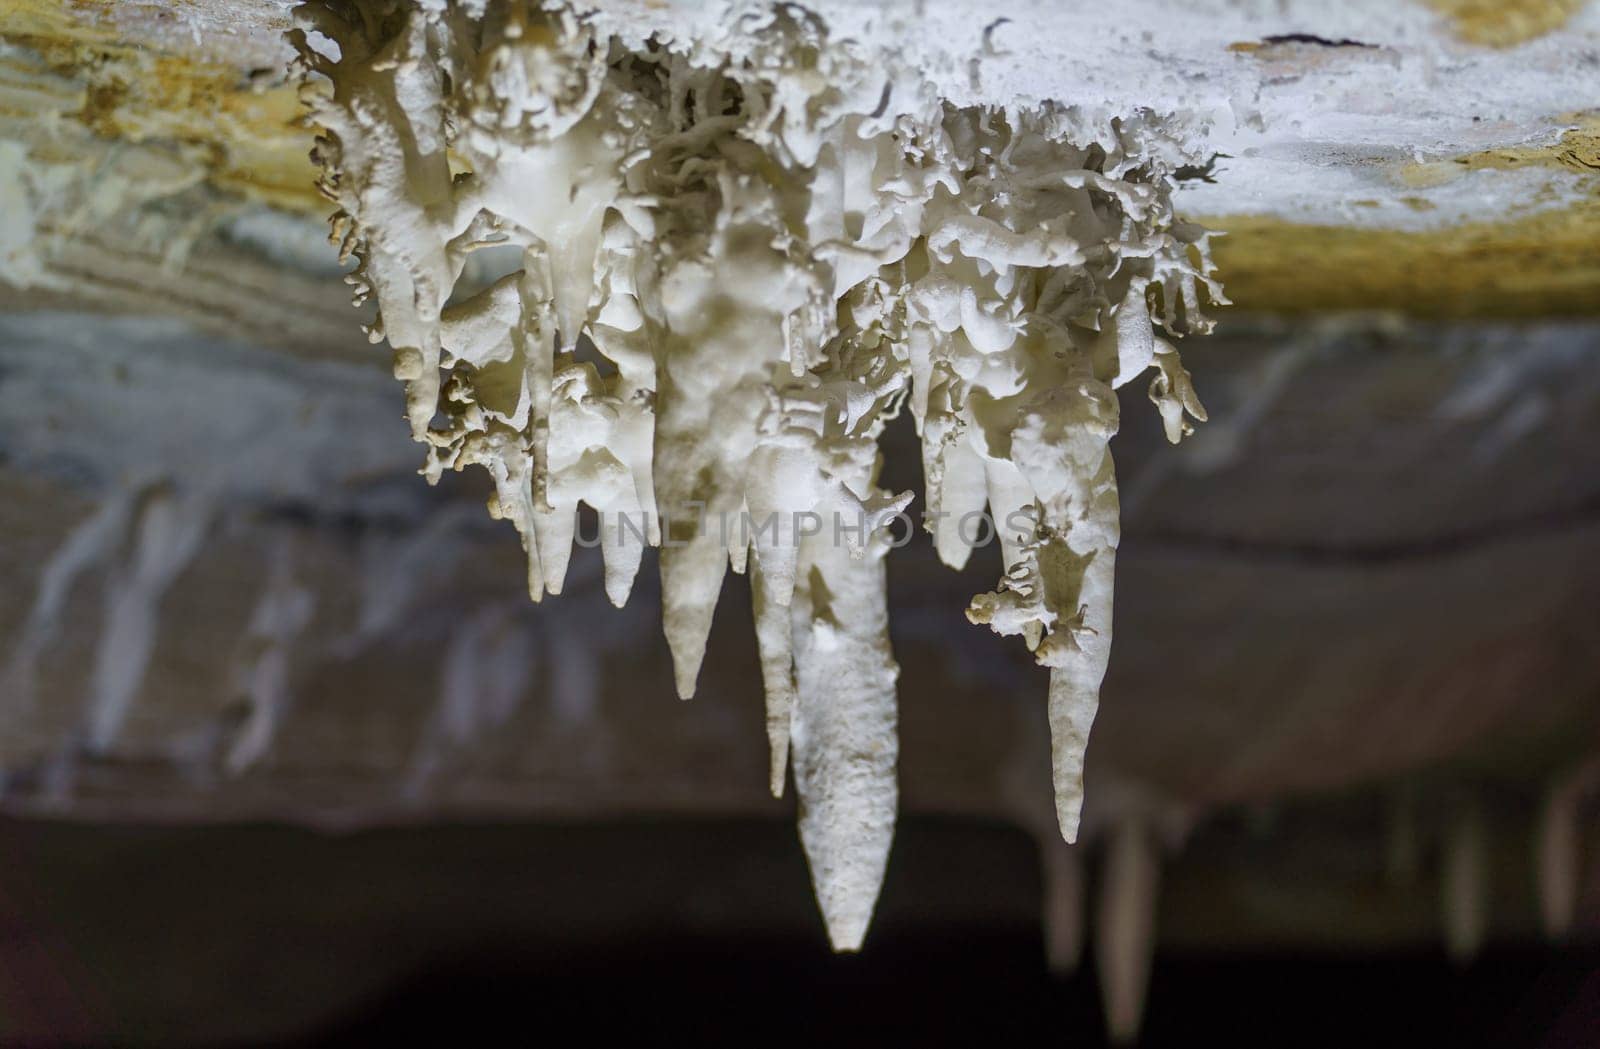 Close-up view of icicle stalactites inside a cold, dark cave in winter.